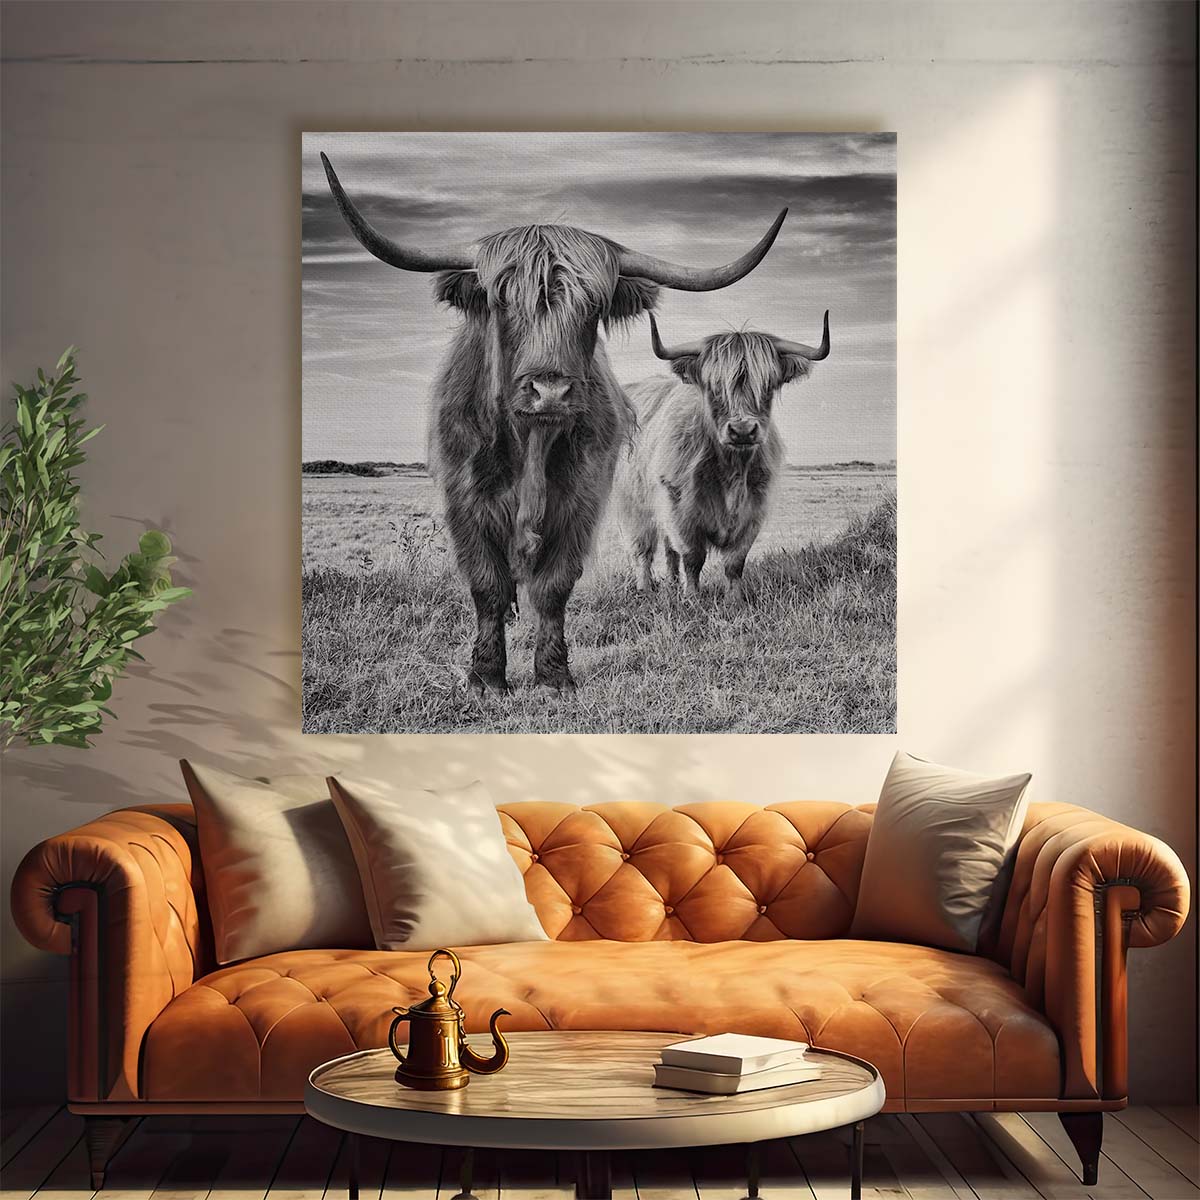 Black & White Highlands Cow Photography Animal Art Wall Art by Luxuriance Designs. Made in USA.